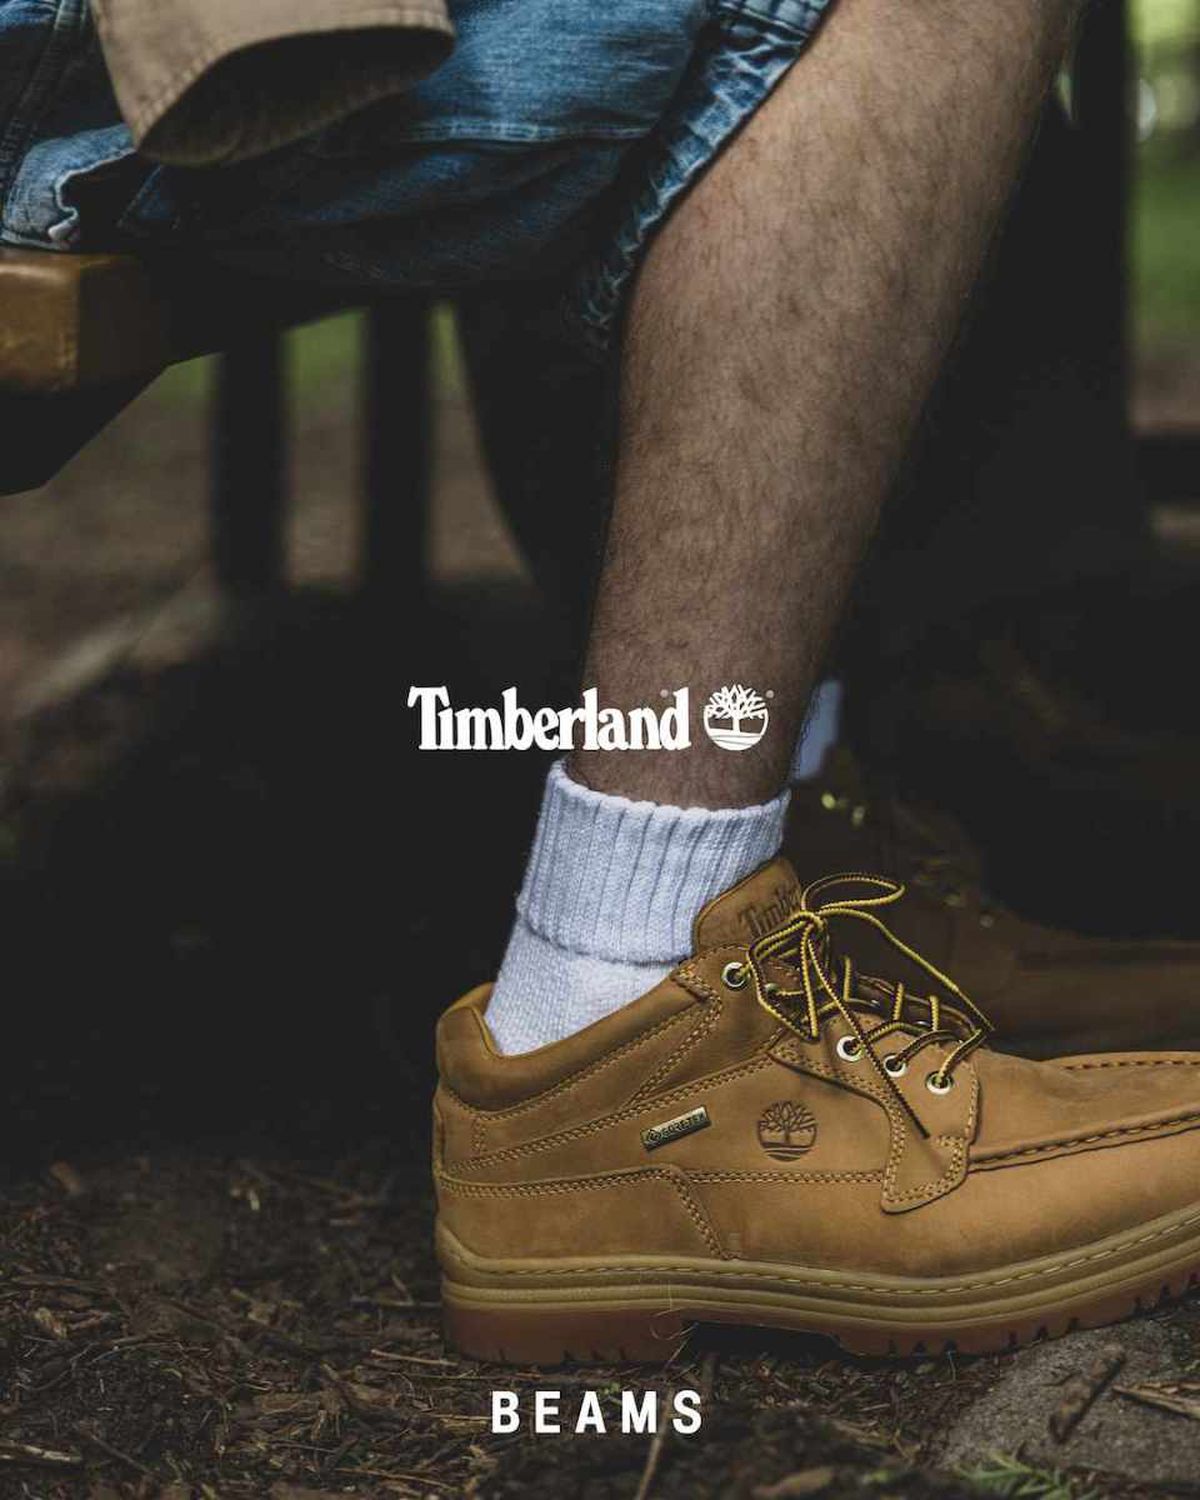 BEAMS' GORE-TEX Timberland Field Boot Is Really Good